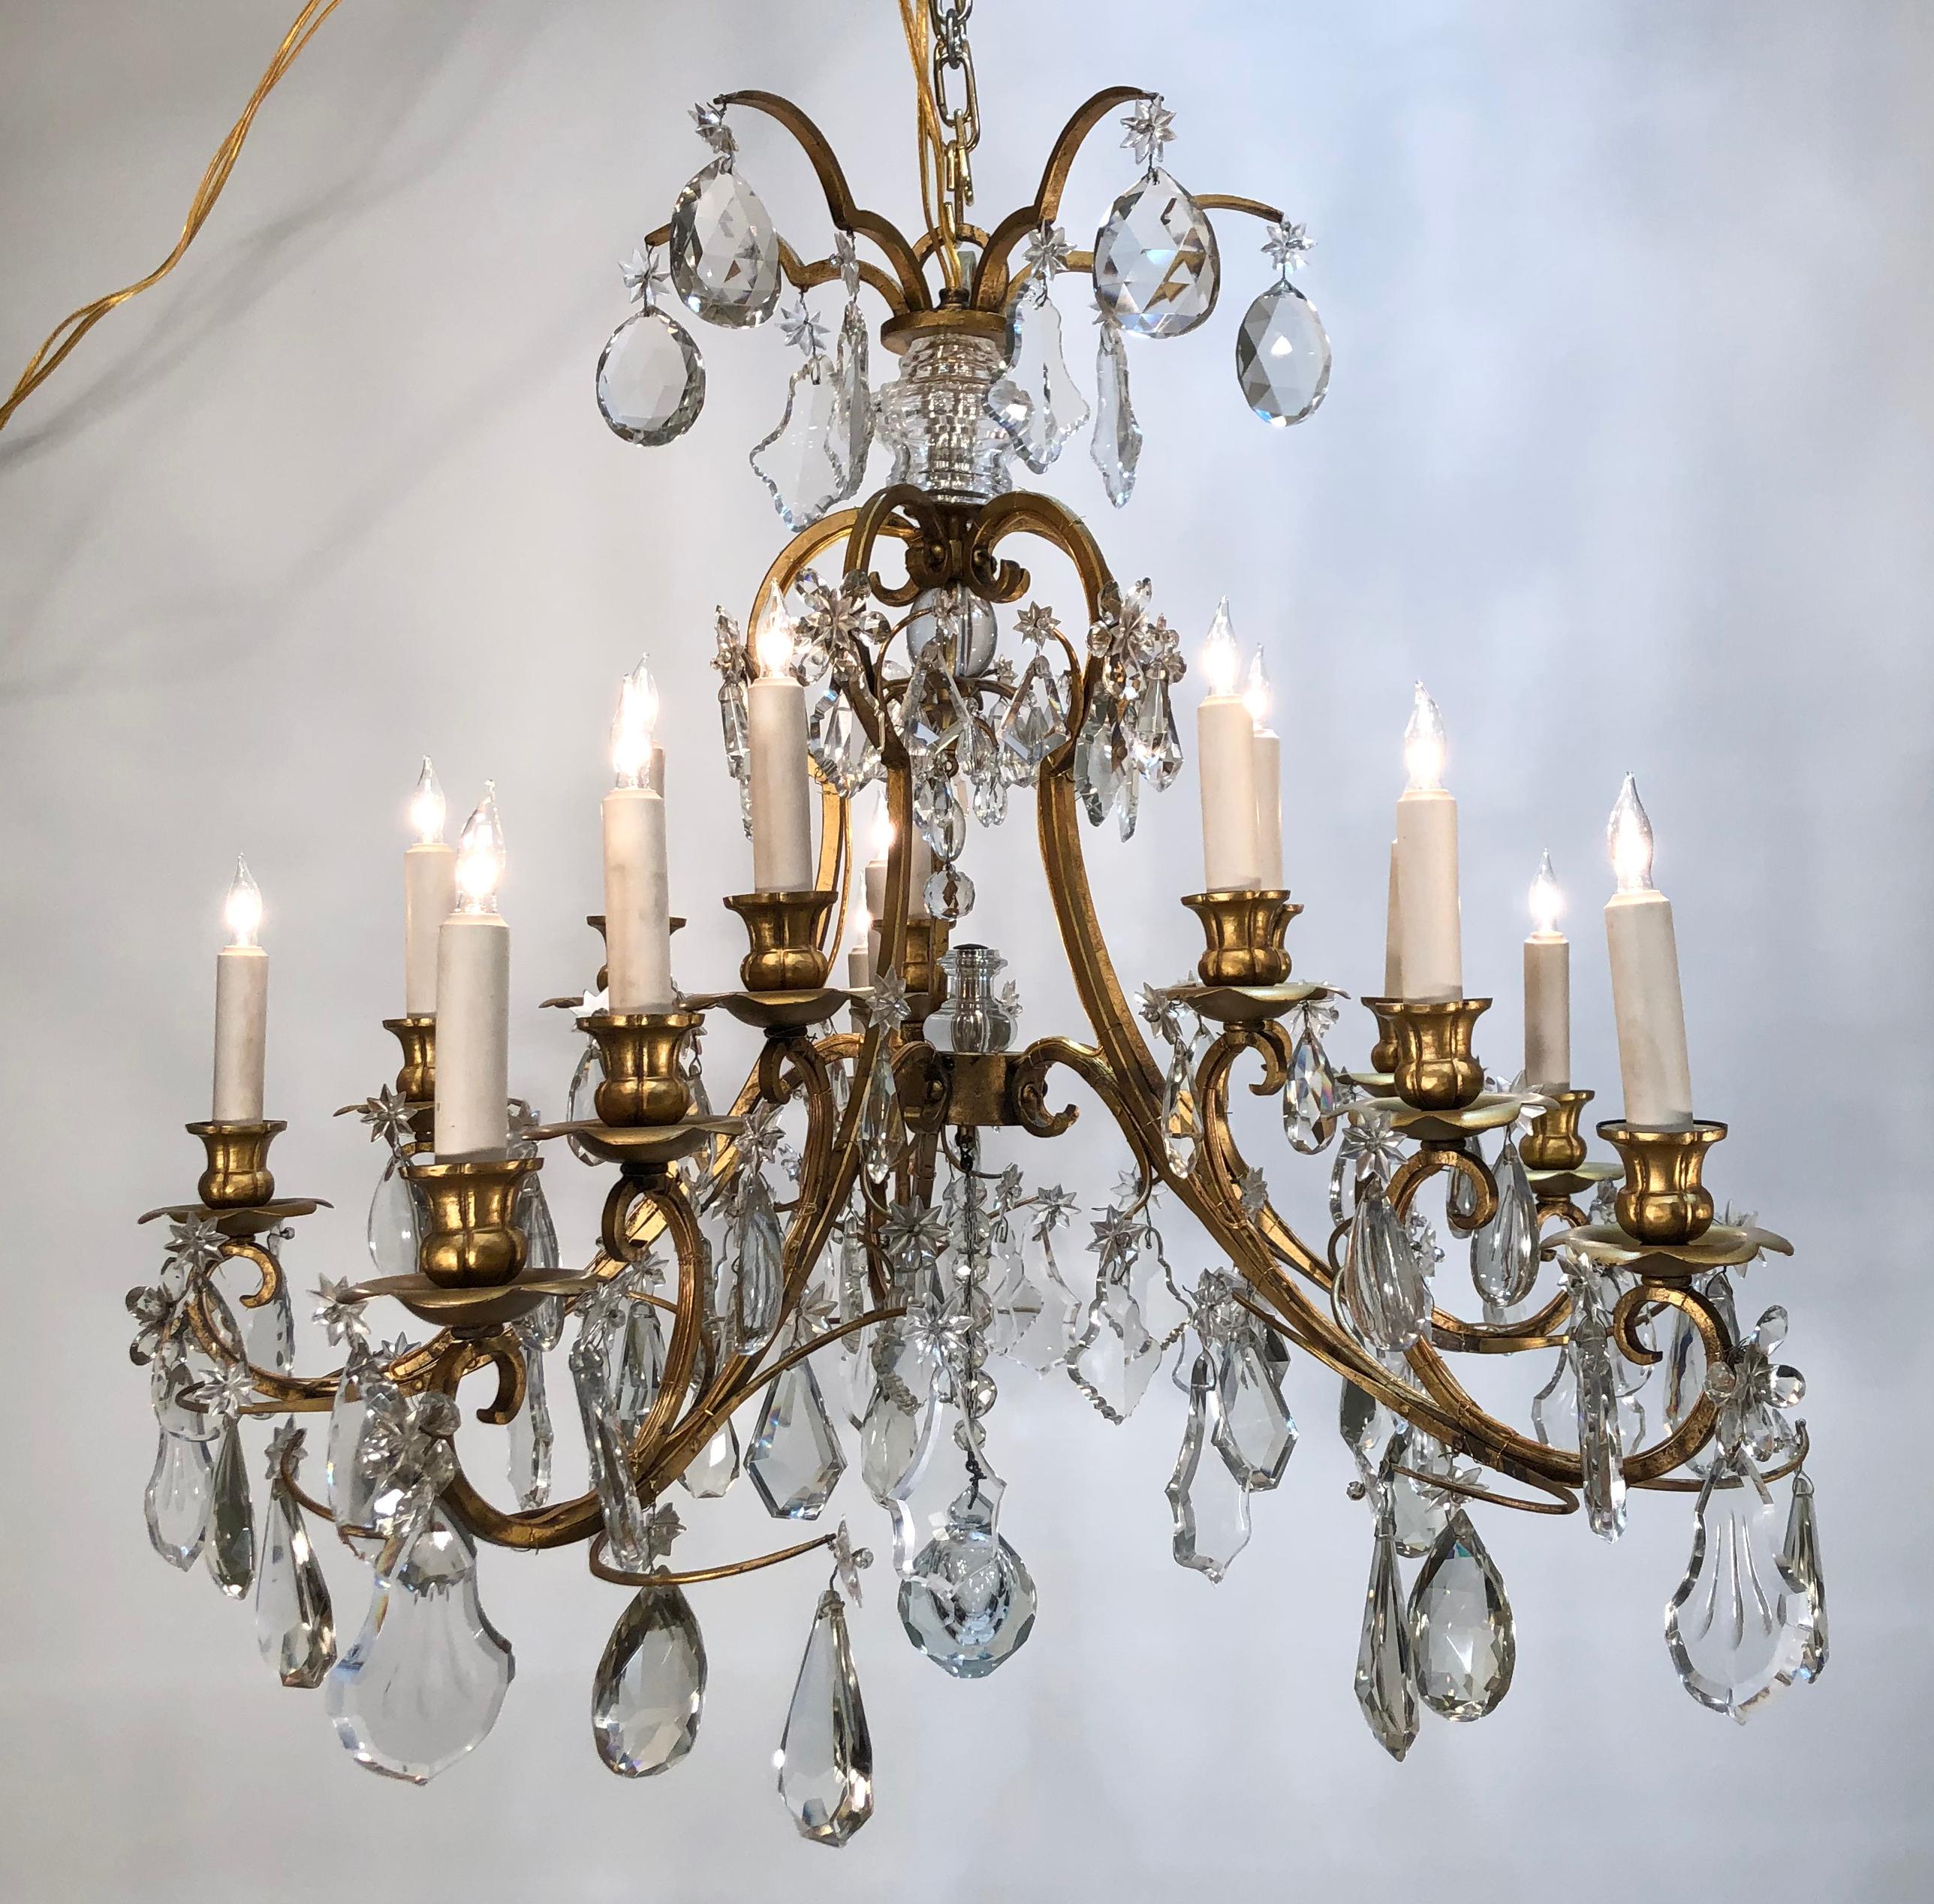  This magnificent Early 20th Century Grand Gilt Iron and Crystal Chandelier is of the Chinoiserie Style. This chandelier exhibits high quality wrought iron, pinned and screwed with the highest quality of crystal. The bobeches and candle cups are